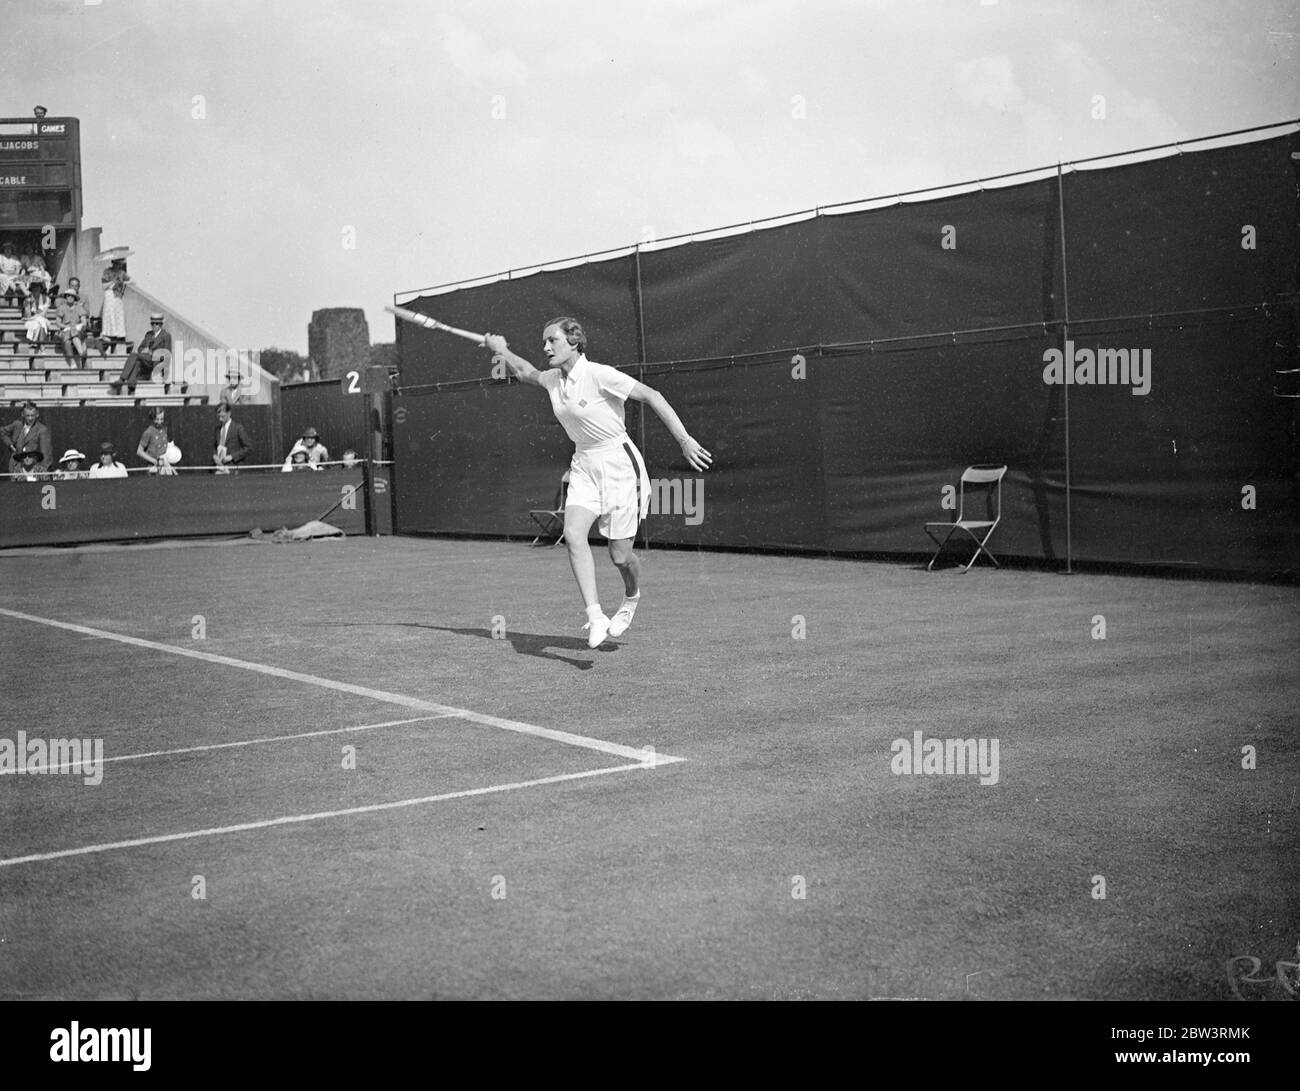 Helen Jacobs Defeats Mrs . Cable In Wimbledon Championships . Miss Helen Jacobs ( USA ) defeated Mrs . M . Cable of Great Britain 6 - 1, 6 - 0 in the first round of the women ' s singles in the Wimbledon Tennis Championships . Photo Shows : Miss Helen Jacobs in play against Mrs . Cable 23 Jun 1936 Stock Photo